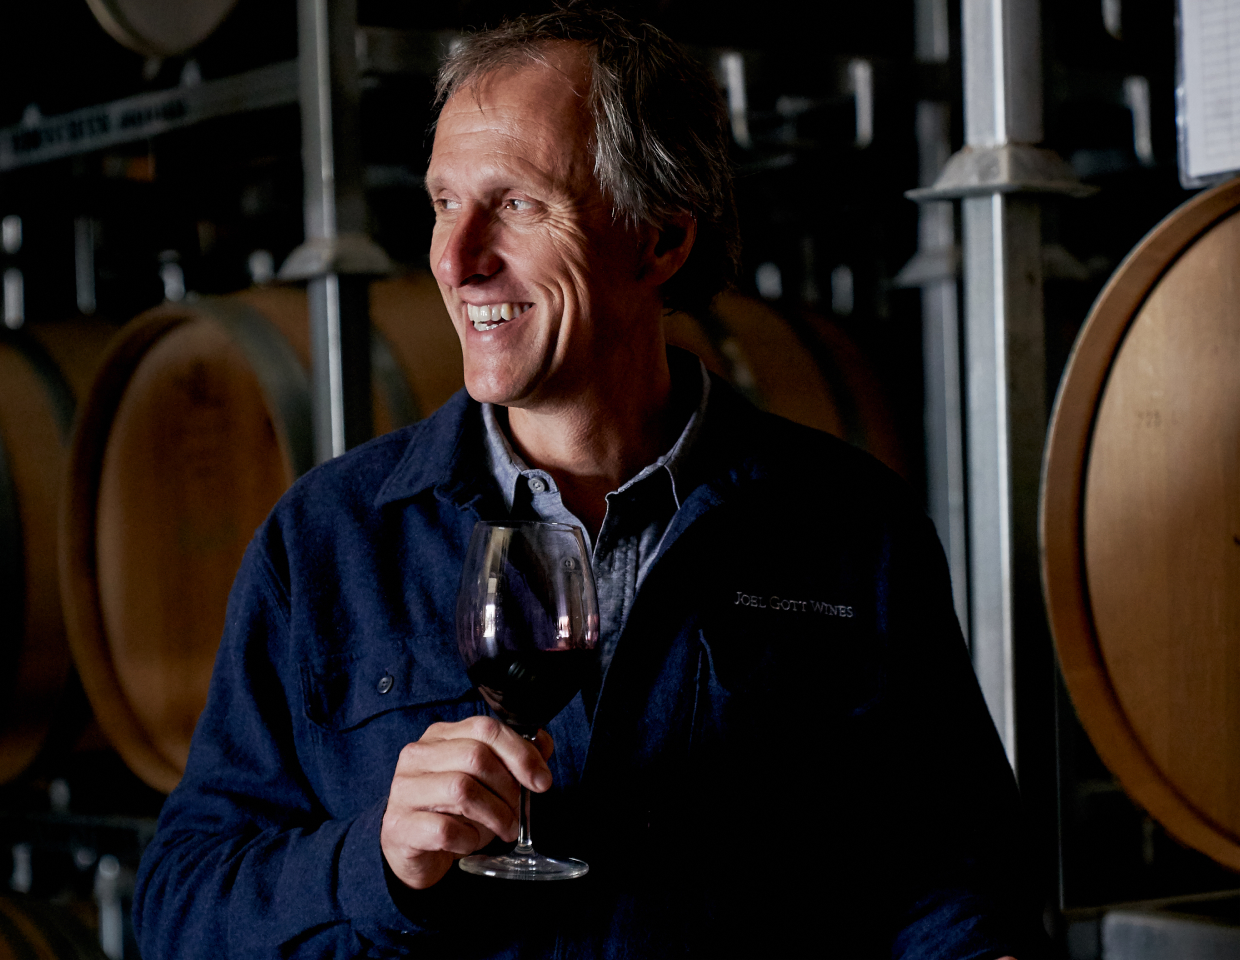 Joel Gott smiling and sampling wine in front of a row of wine barrels.